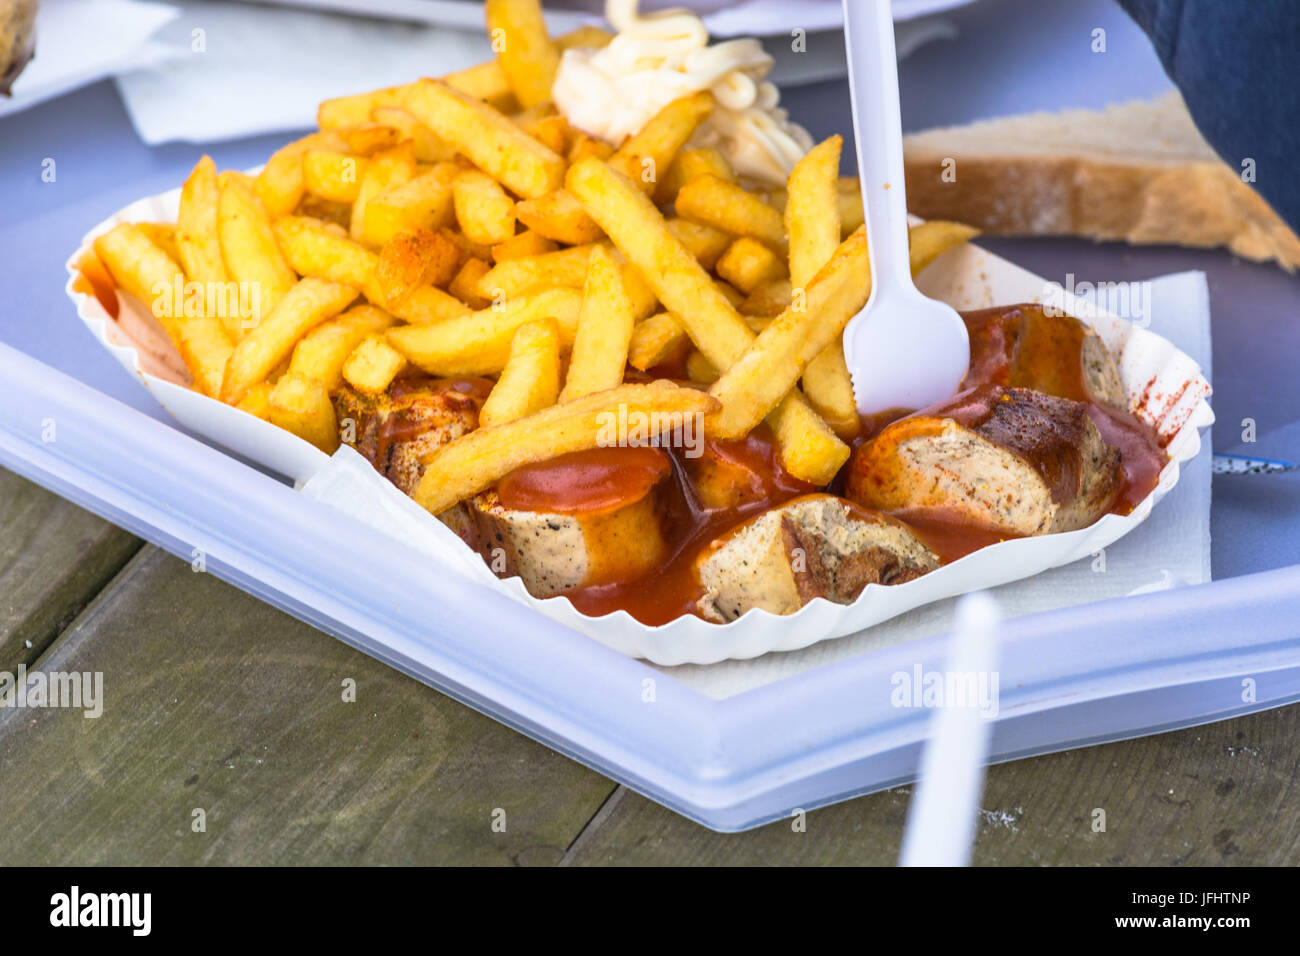 Paper bag with curried sausage and French fries Stock Photo